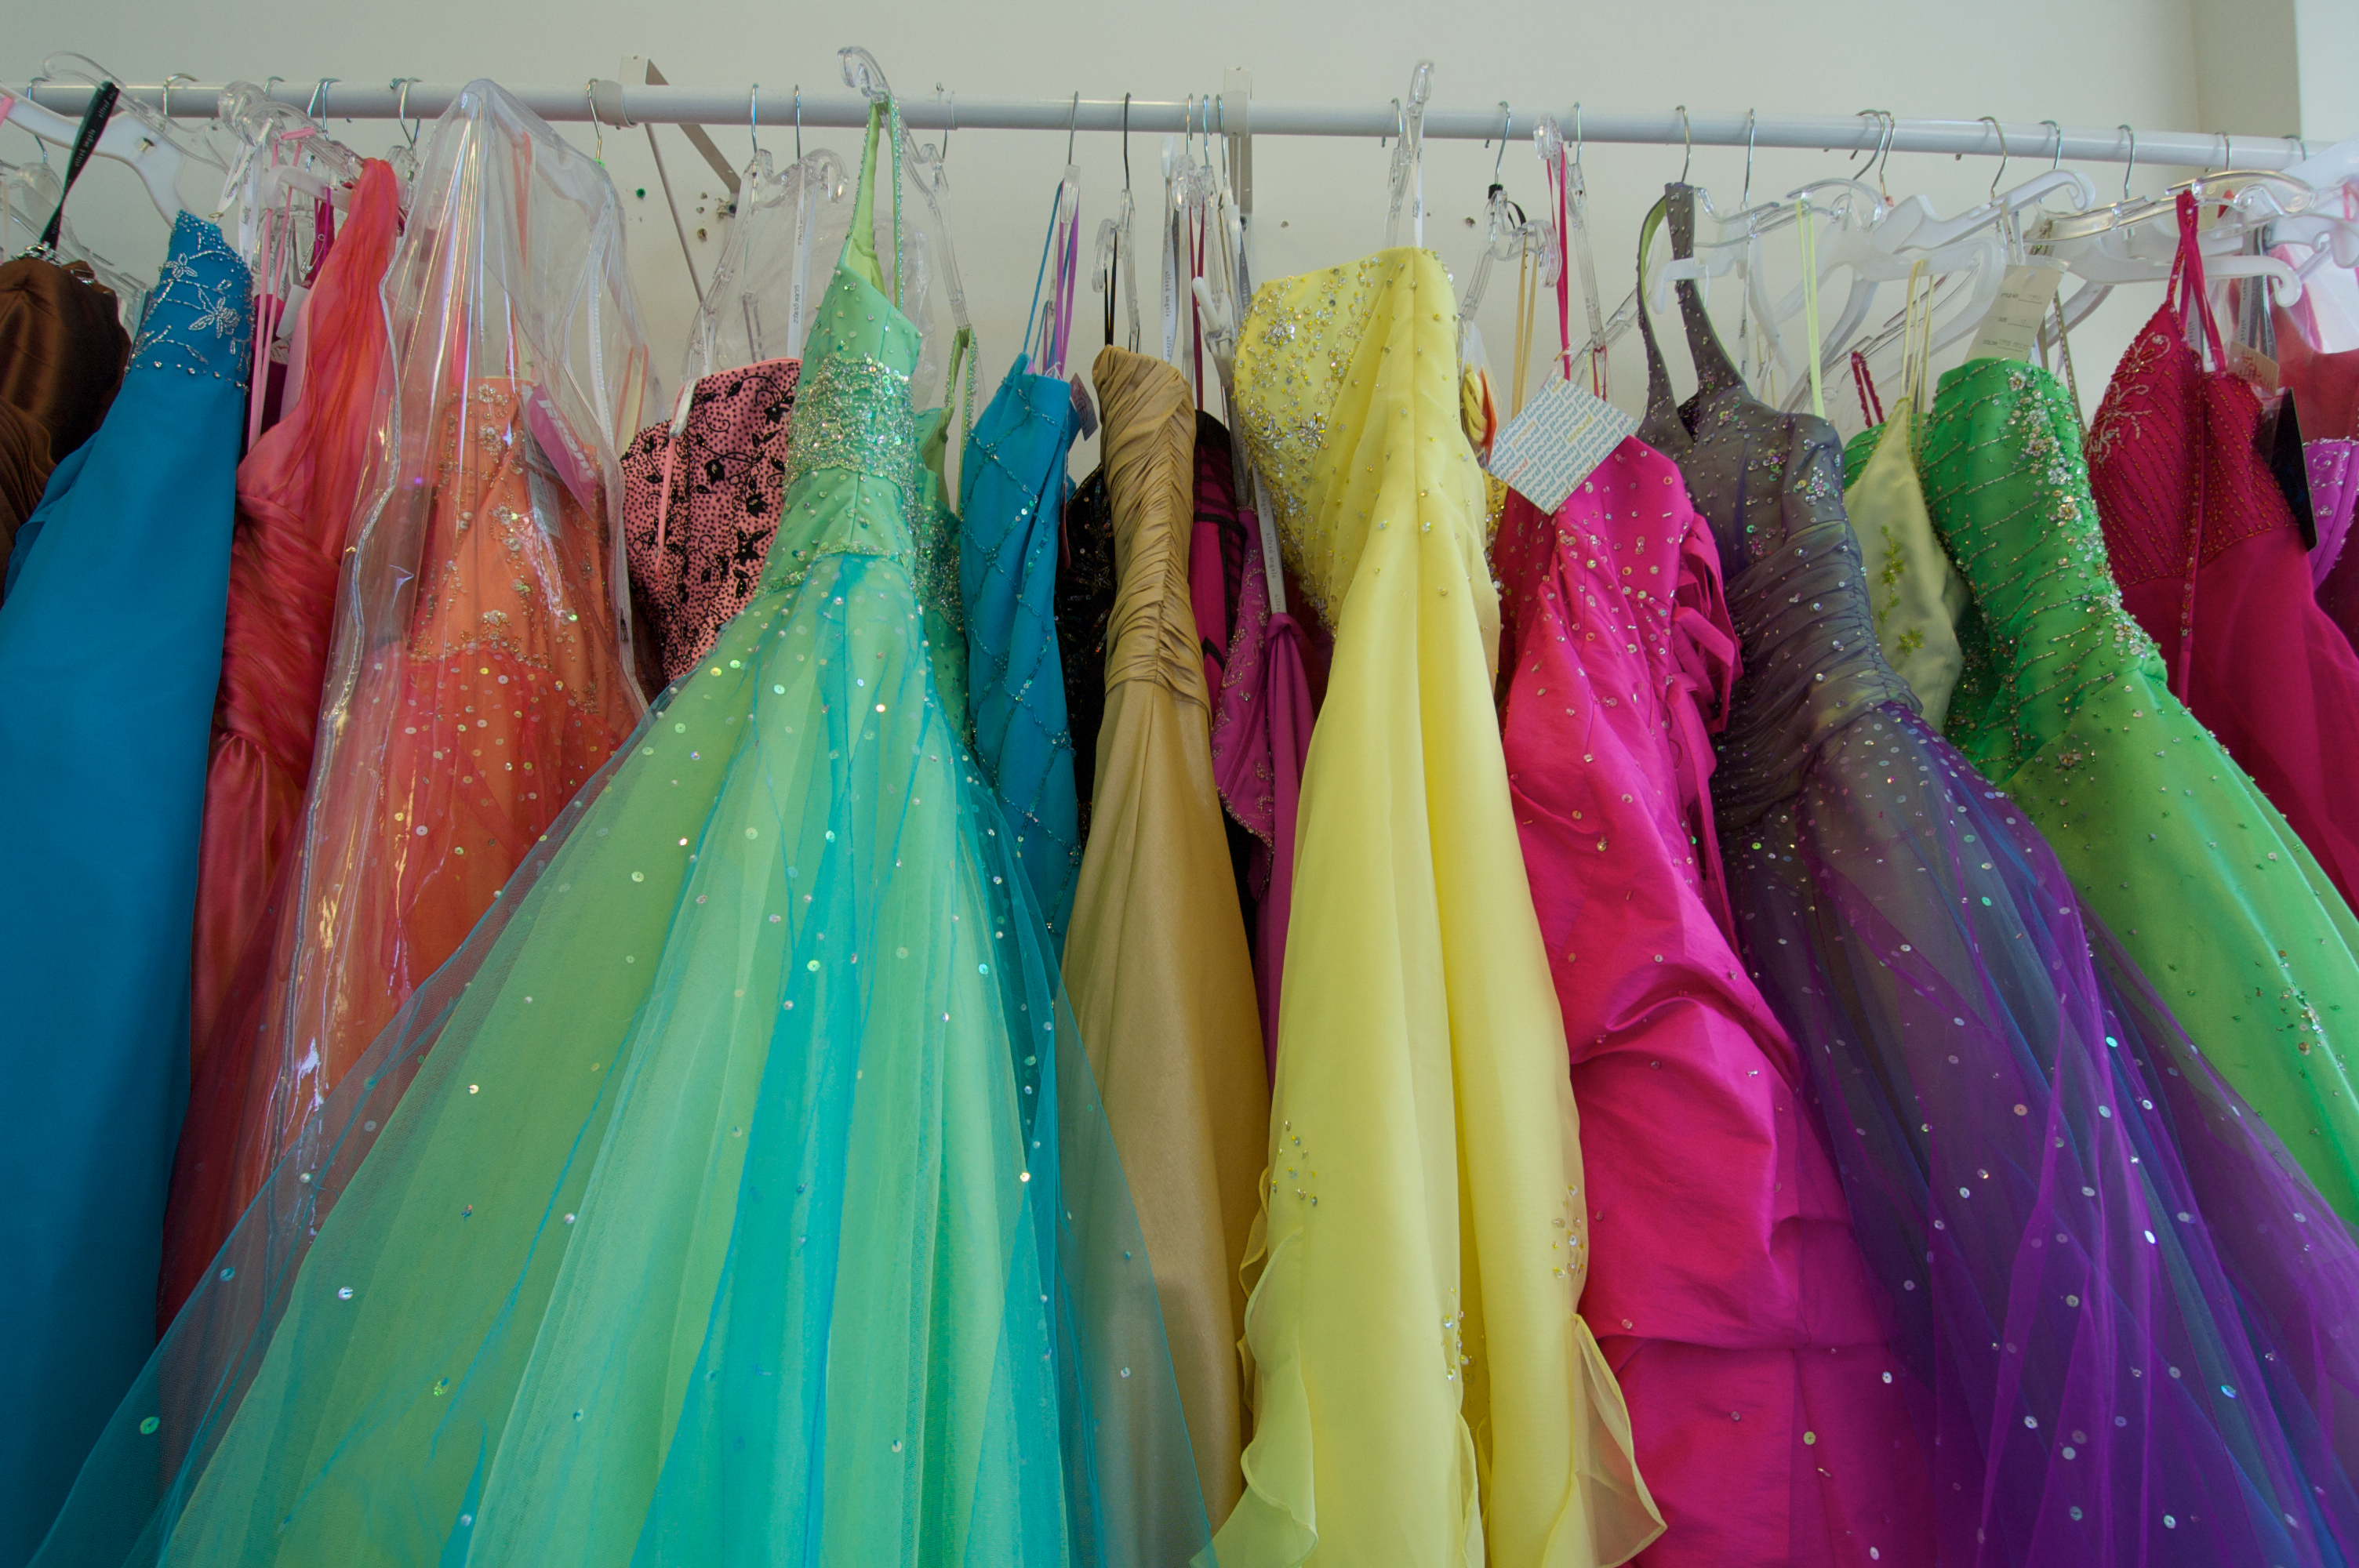 Pretty prom dresses ready for young shoppers crowd the rack. (Alan Fishleder—Getty Images)